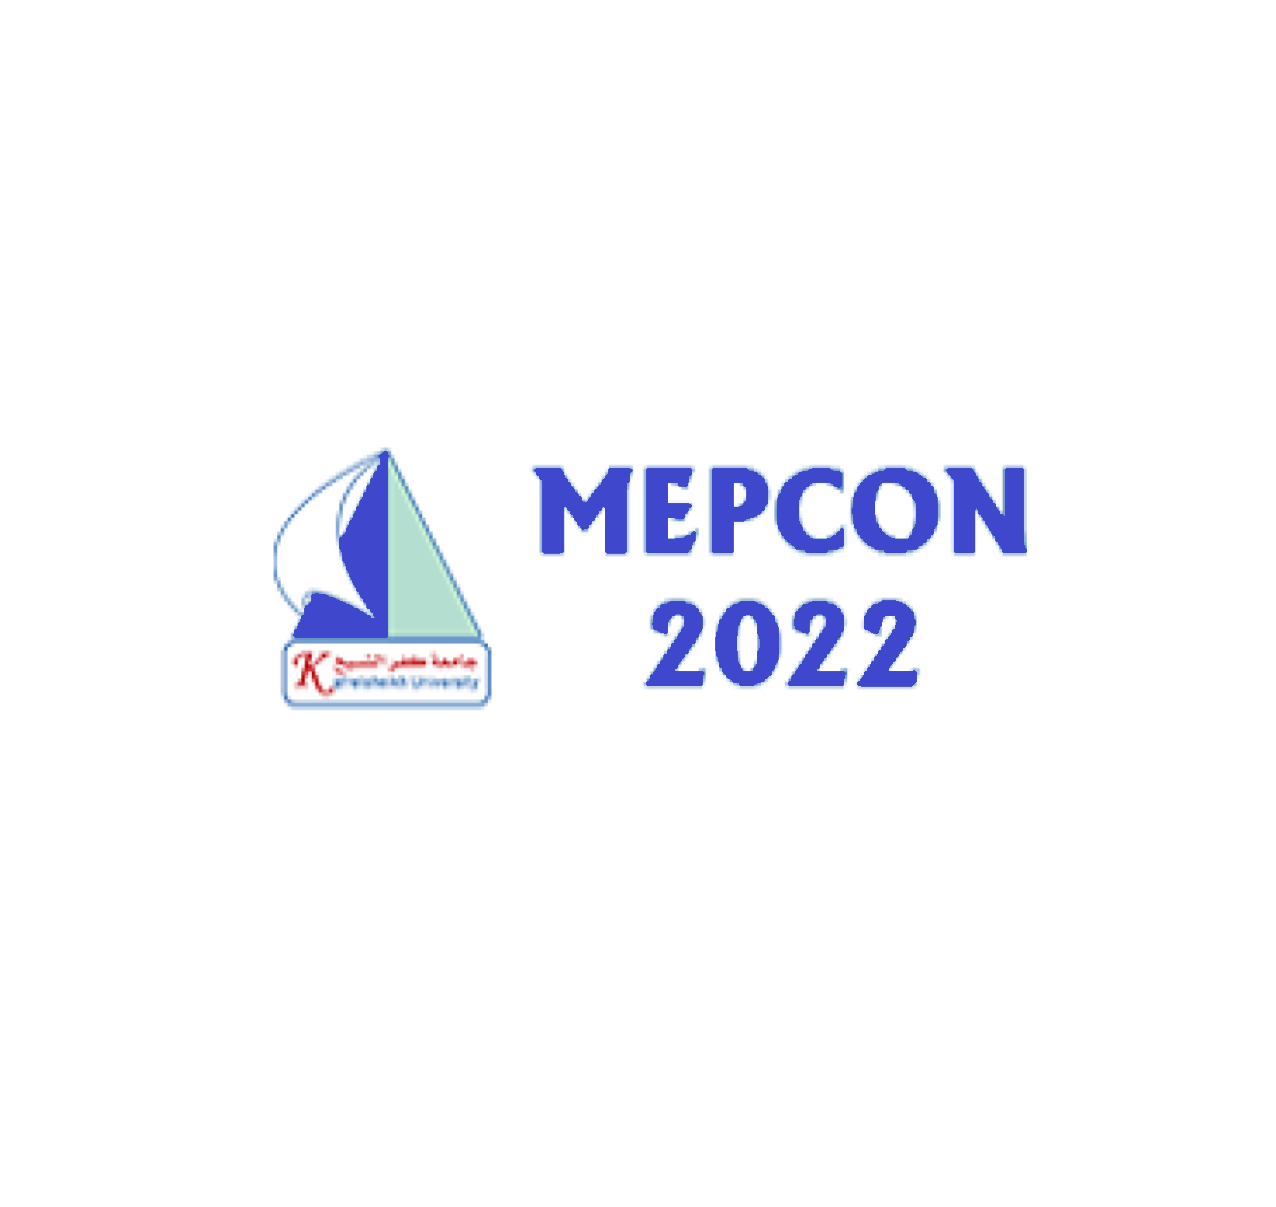 Mepcon For Contracting